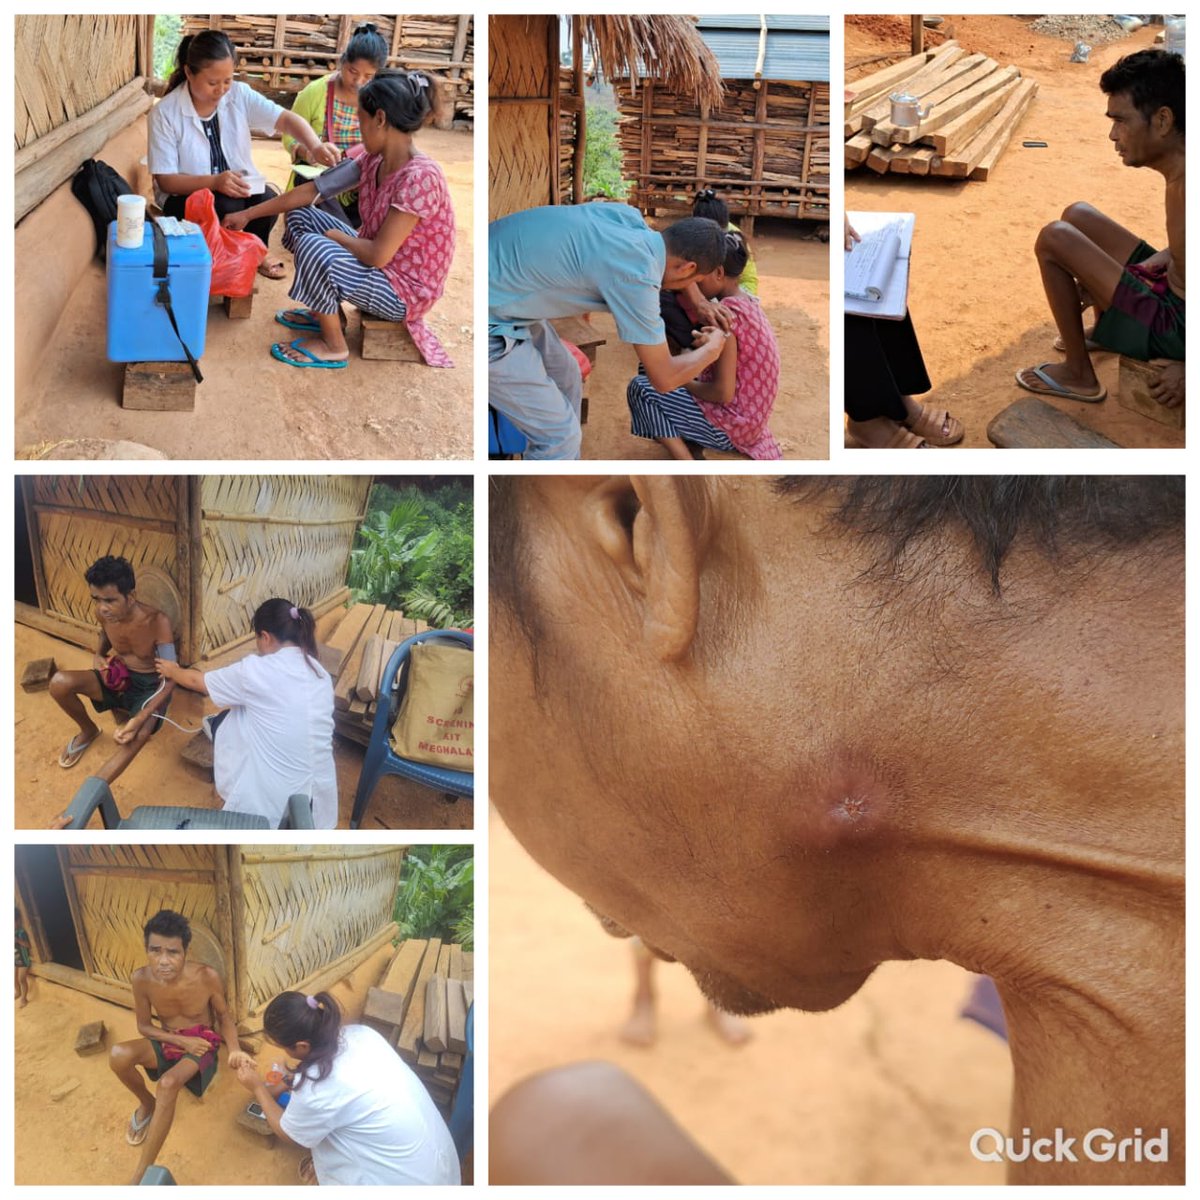 A team from Gitokgre HWC, recently undertook a home visit to care for Dineng M Sangma, a 54 yrs, from Jingamgre #EastGaroHills. Despite his severe health challenges, due to a painful abscess behind his left ear, the team ensured he received immediate attention.
#HealthForAll